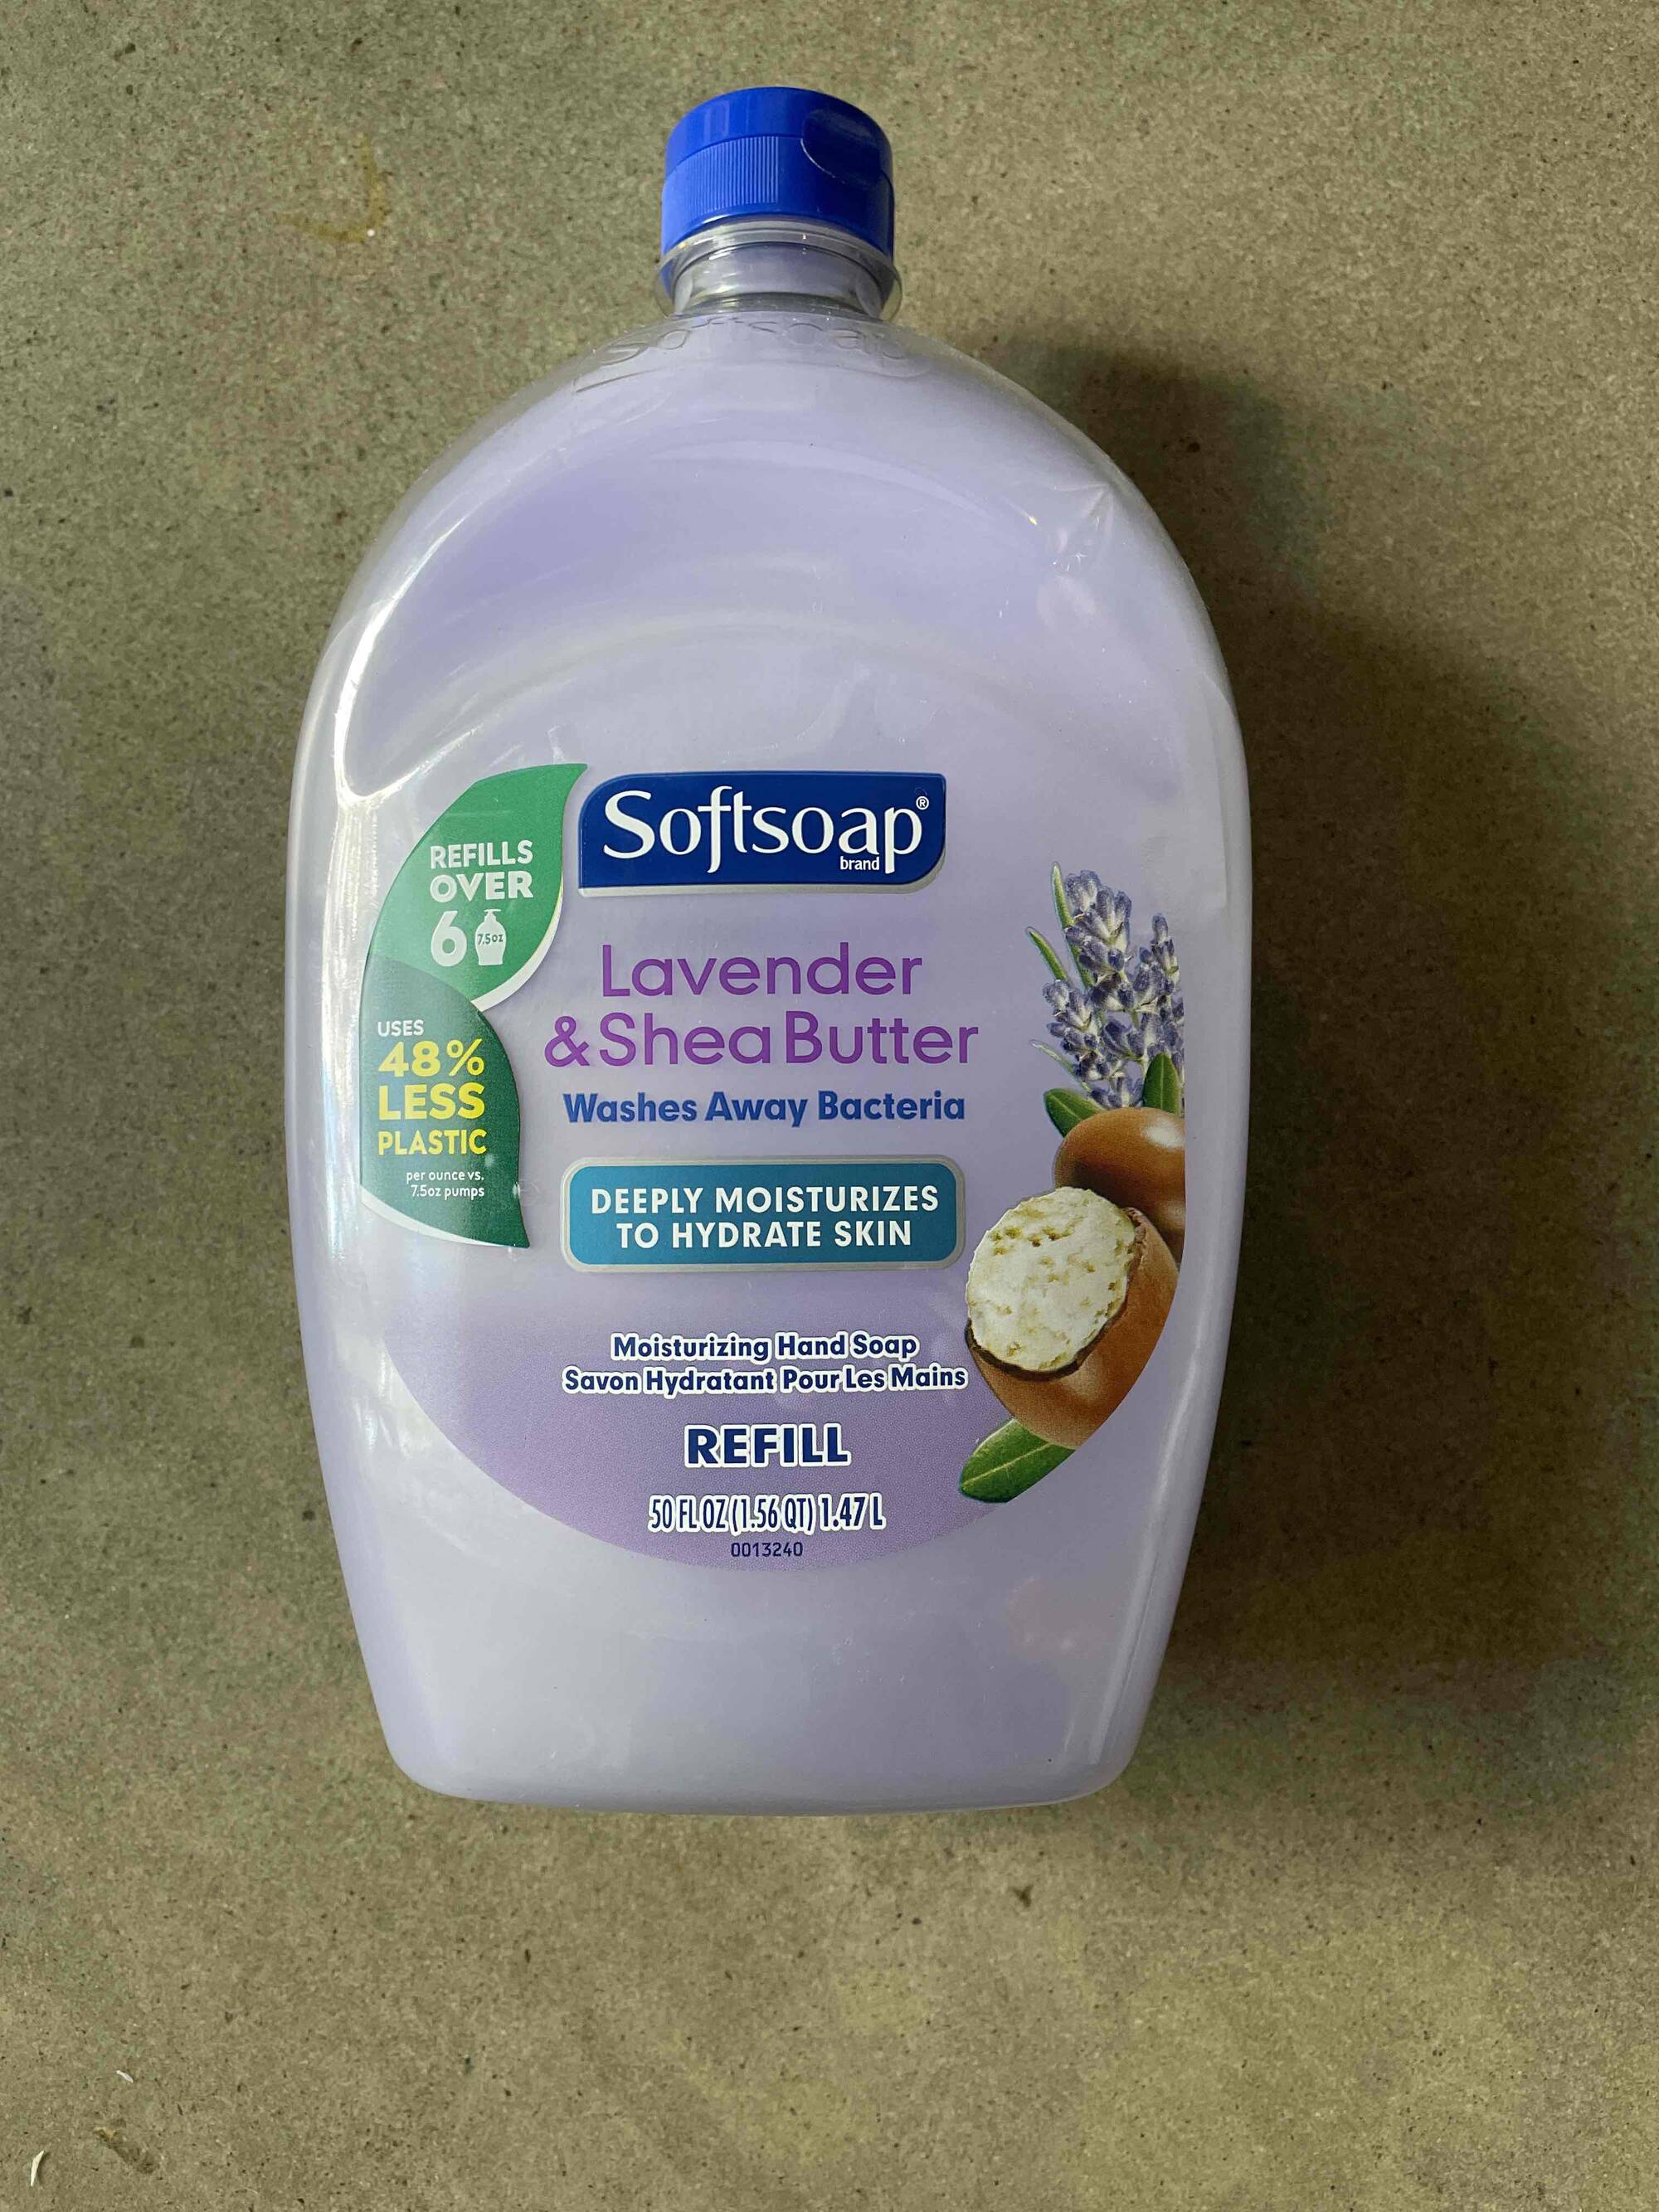 SOFTSOAP - Lavender and shea better - Savon hydratant pour Lina